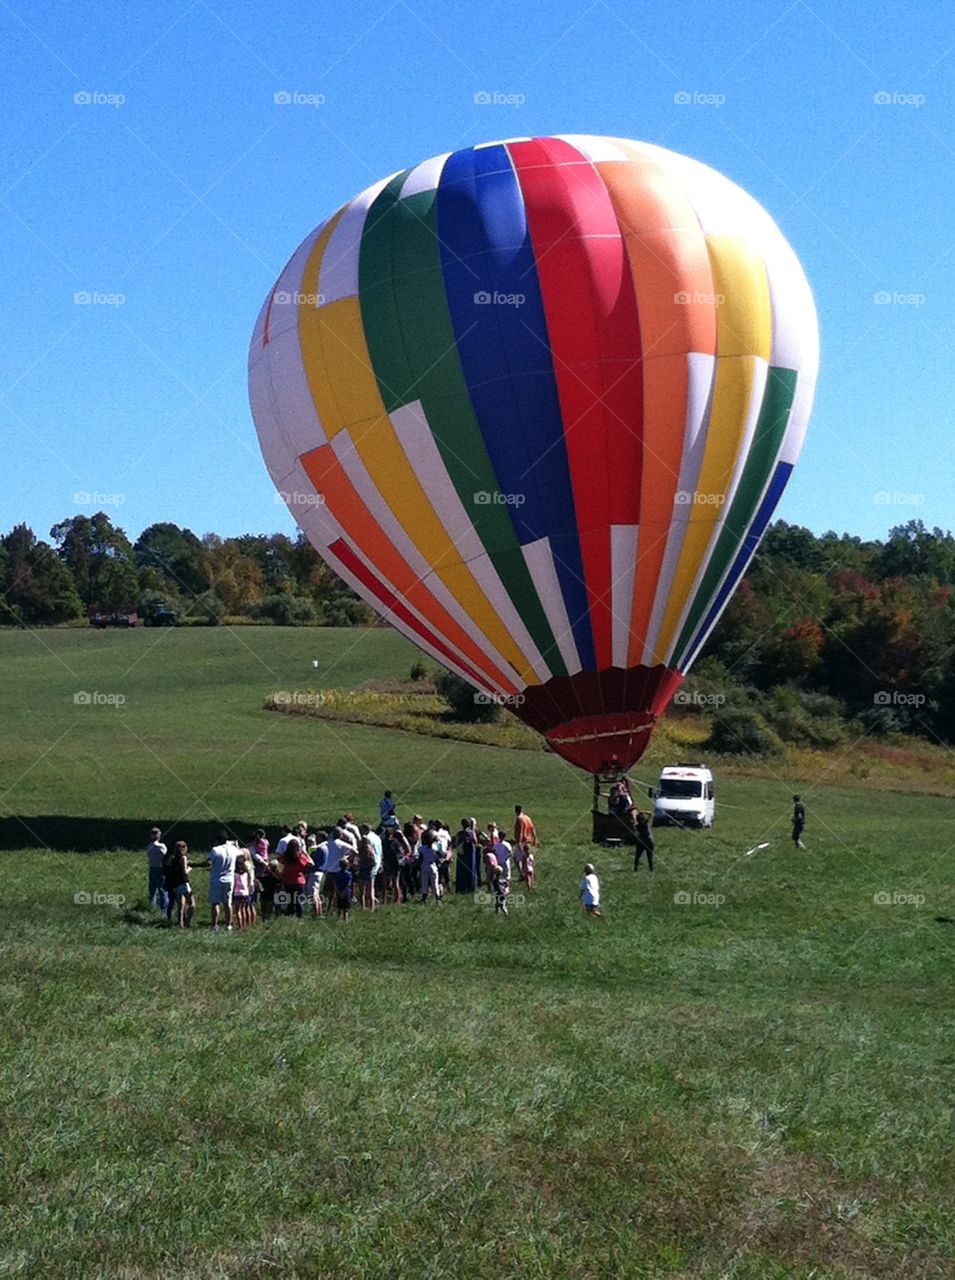 Getting Ready for a turn on a Hot Air Balloon 